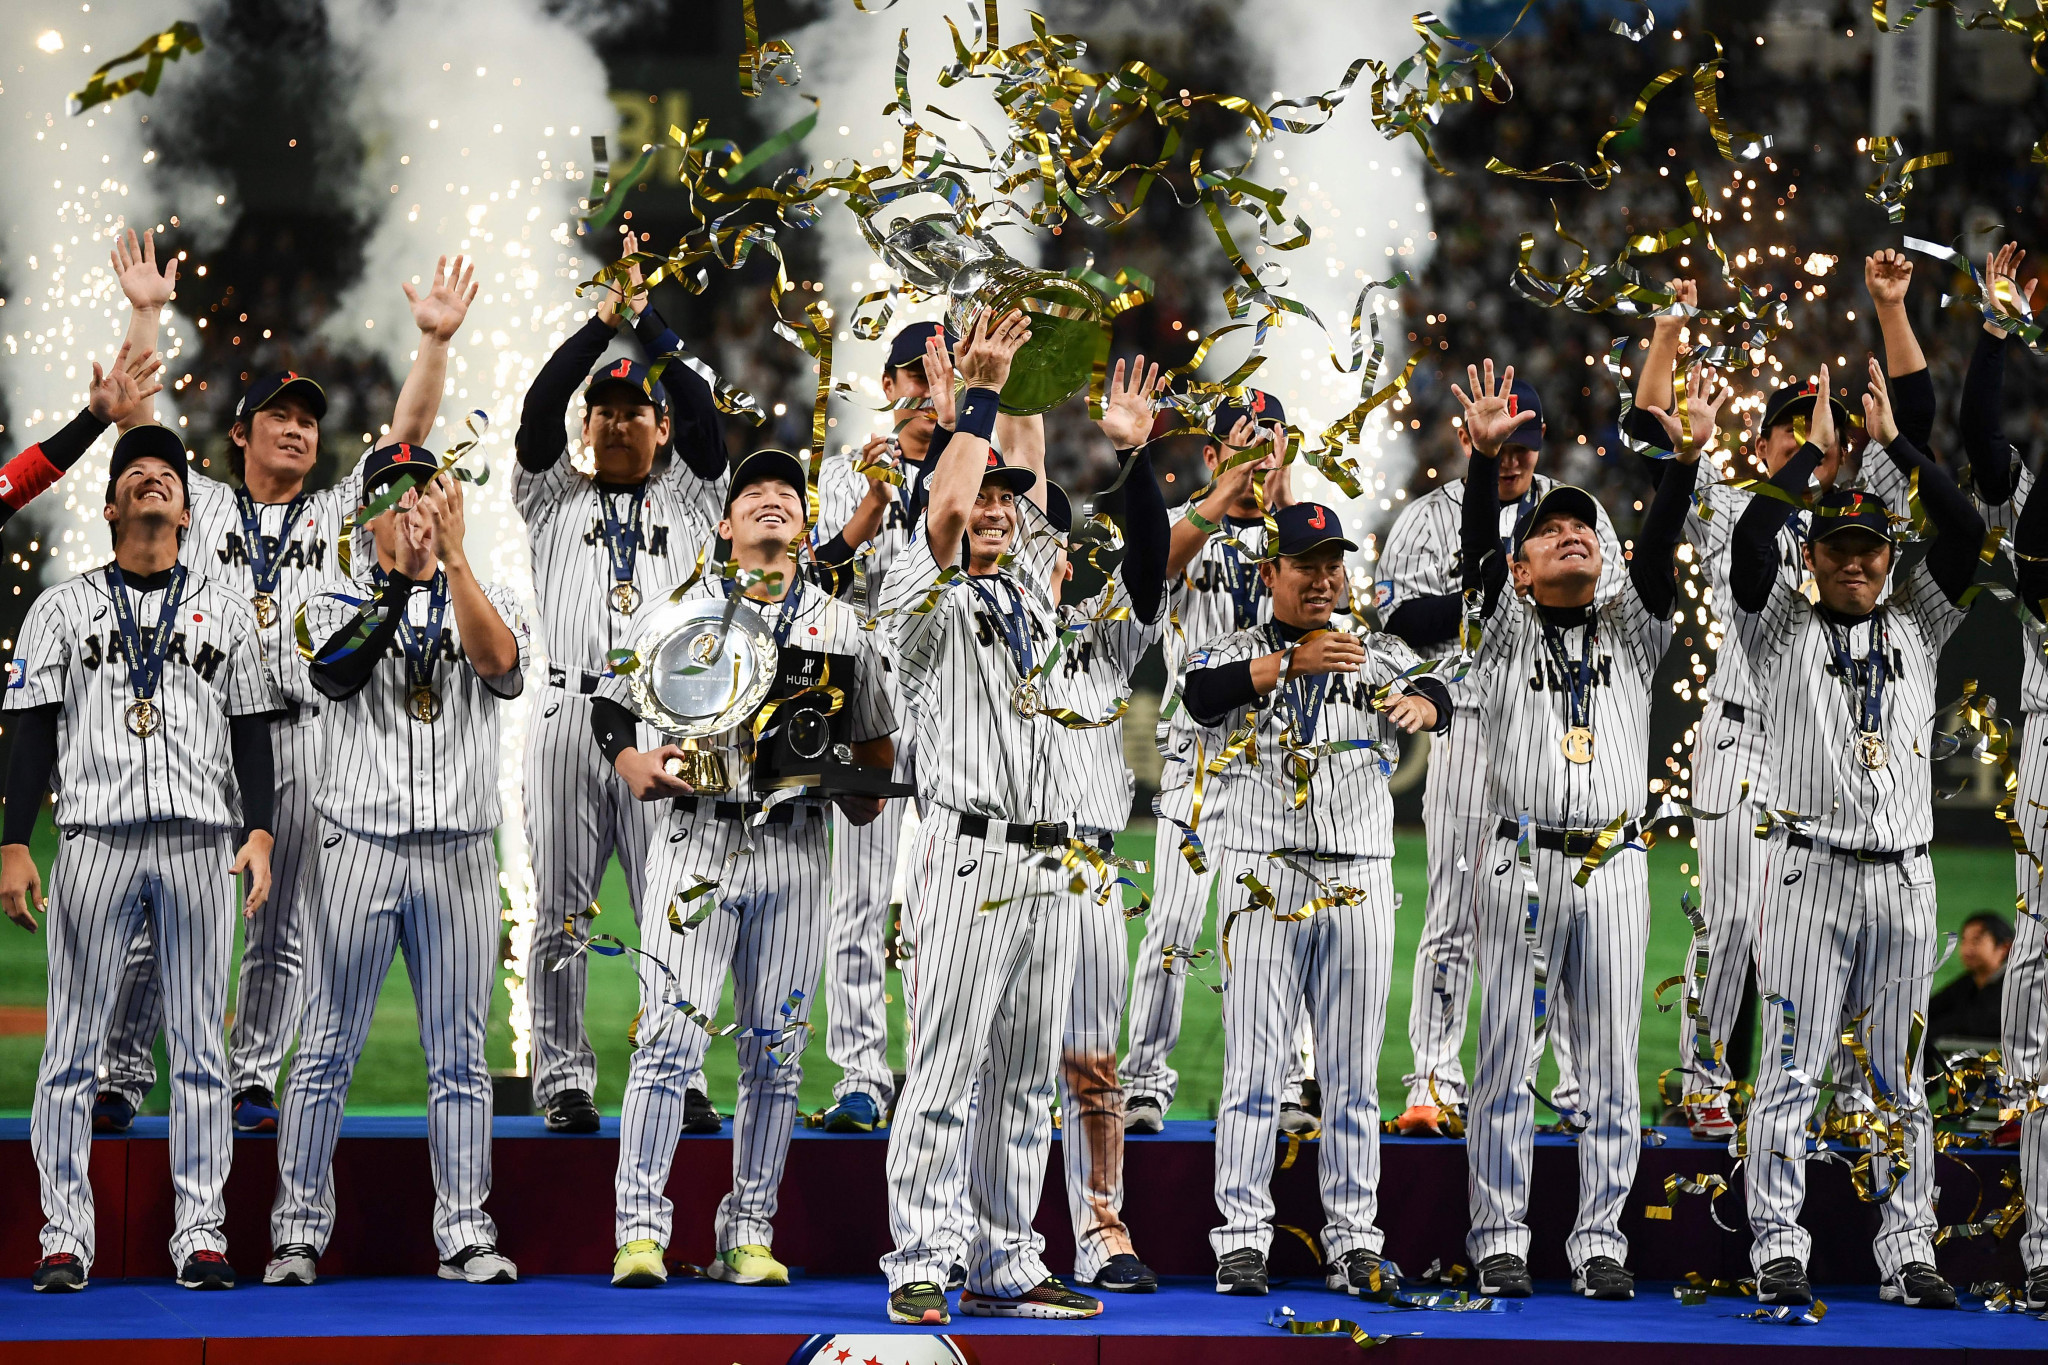 Japan were crowned the WBSC Premier12 champions after beating South Korea in the final ©Getty Images